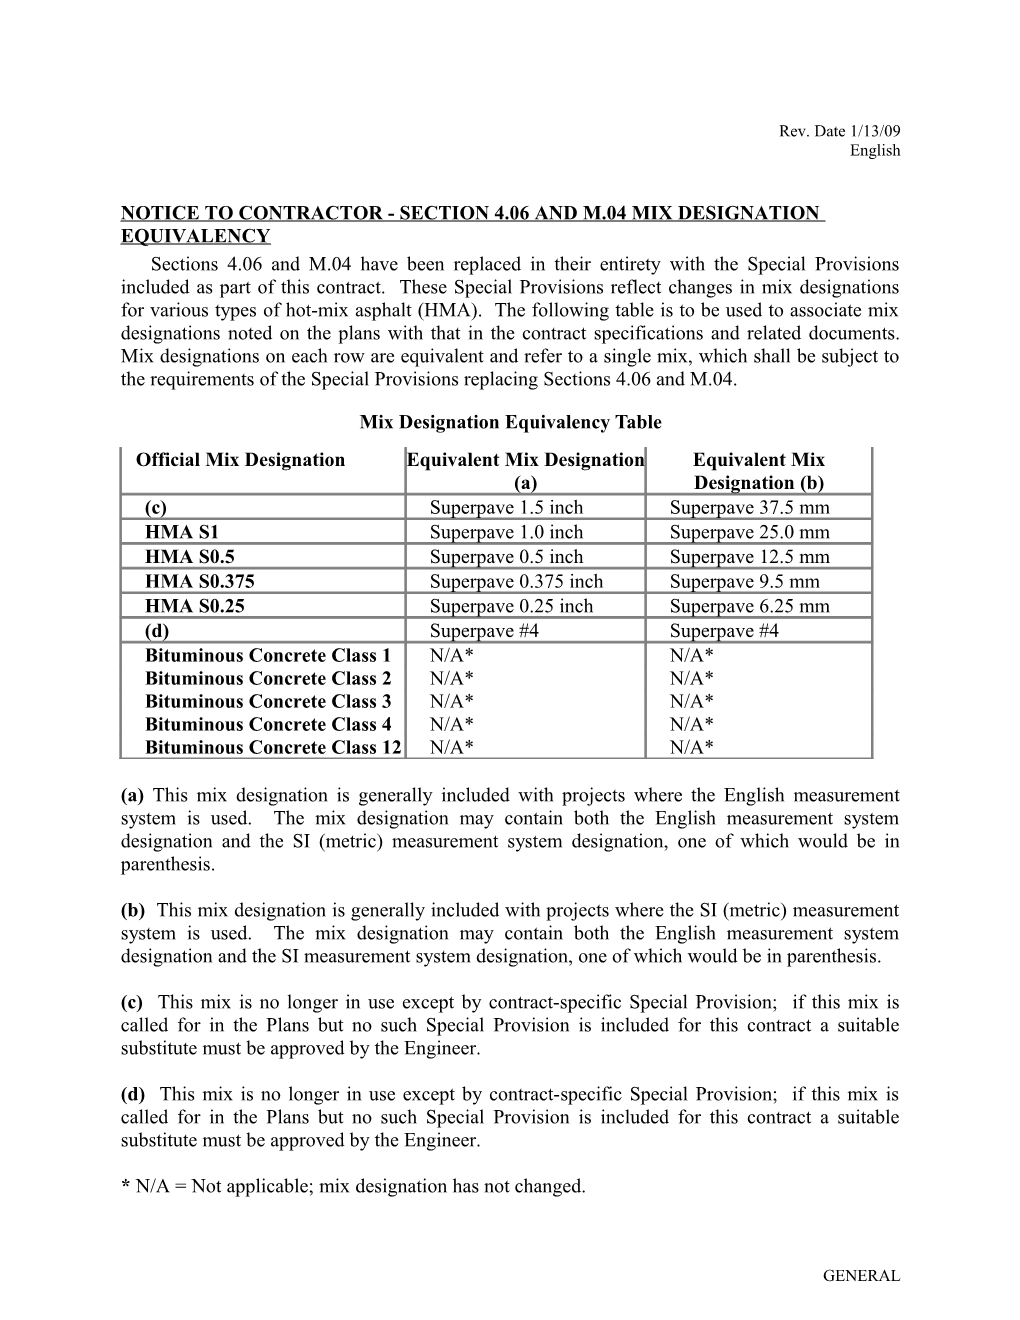 NOTICE to CONTRACTOR - Section 4.06 and M.04 MIX DESIGNATION EQUIVALENCY